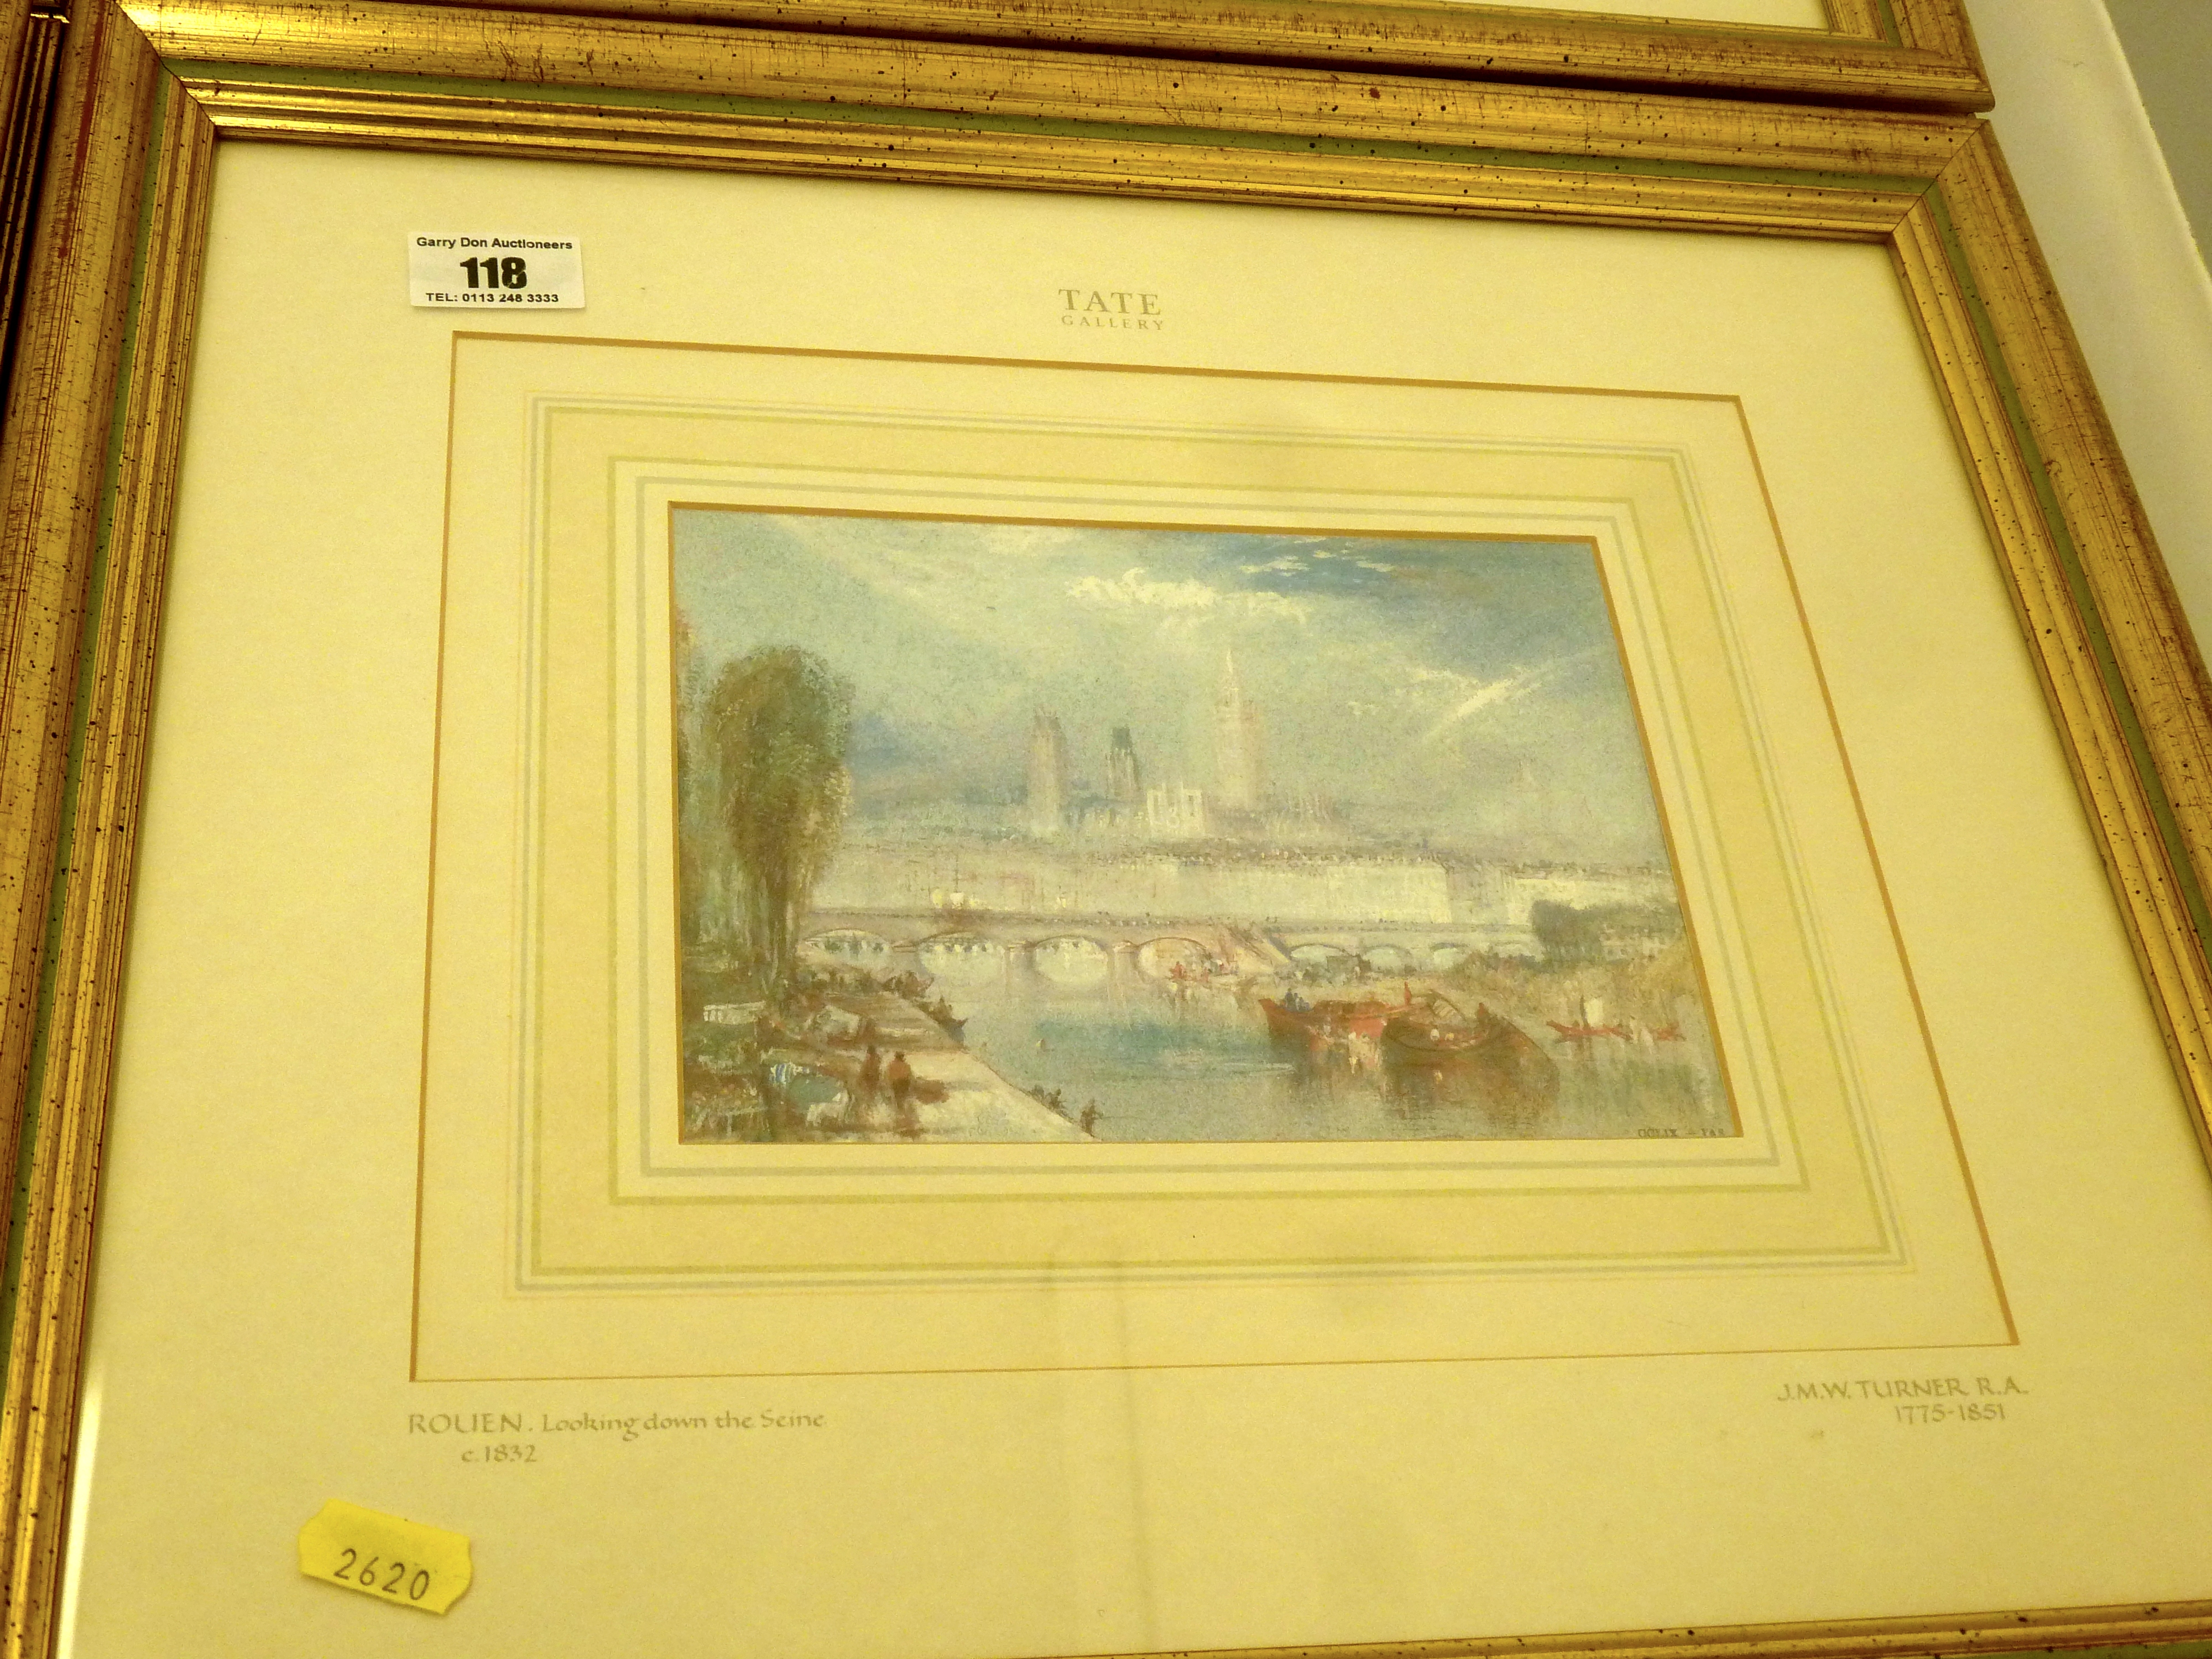 4 TATE GALLERY LIMITED EDITION J.M.W. TURNER 'WANDERINGS BY THE SEINE' PRINTS 908/5000 APPROX 5. - Image 2 of 9